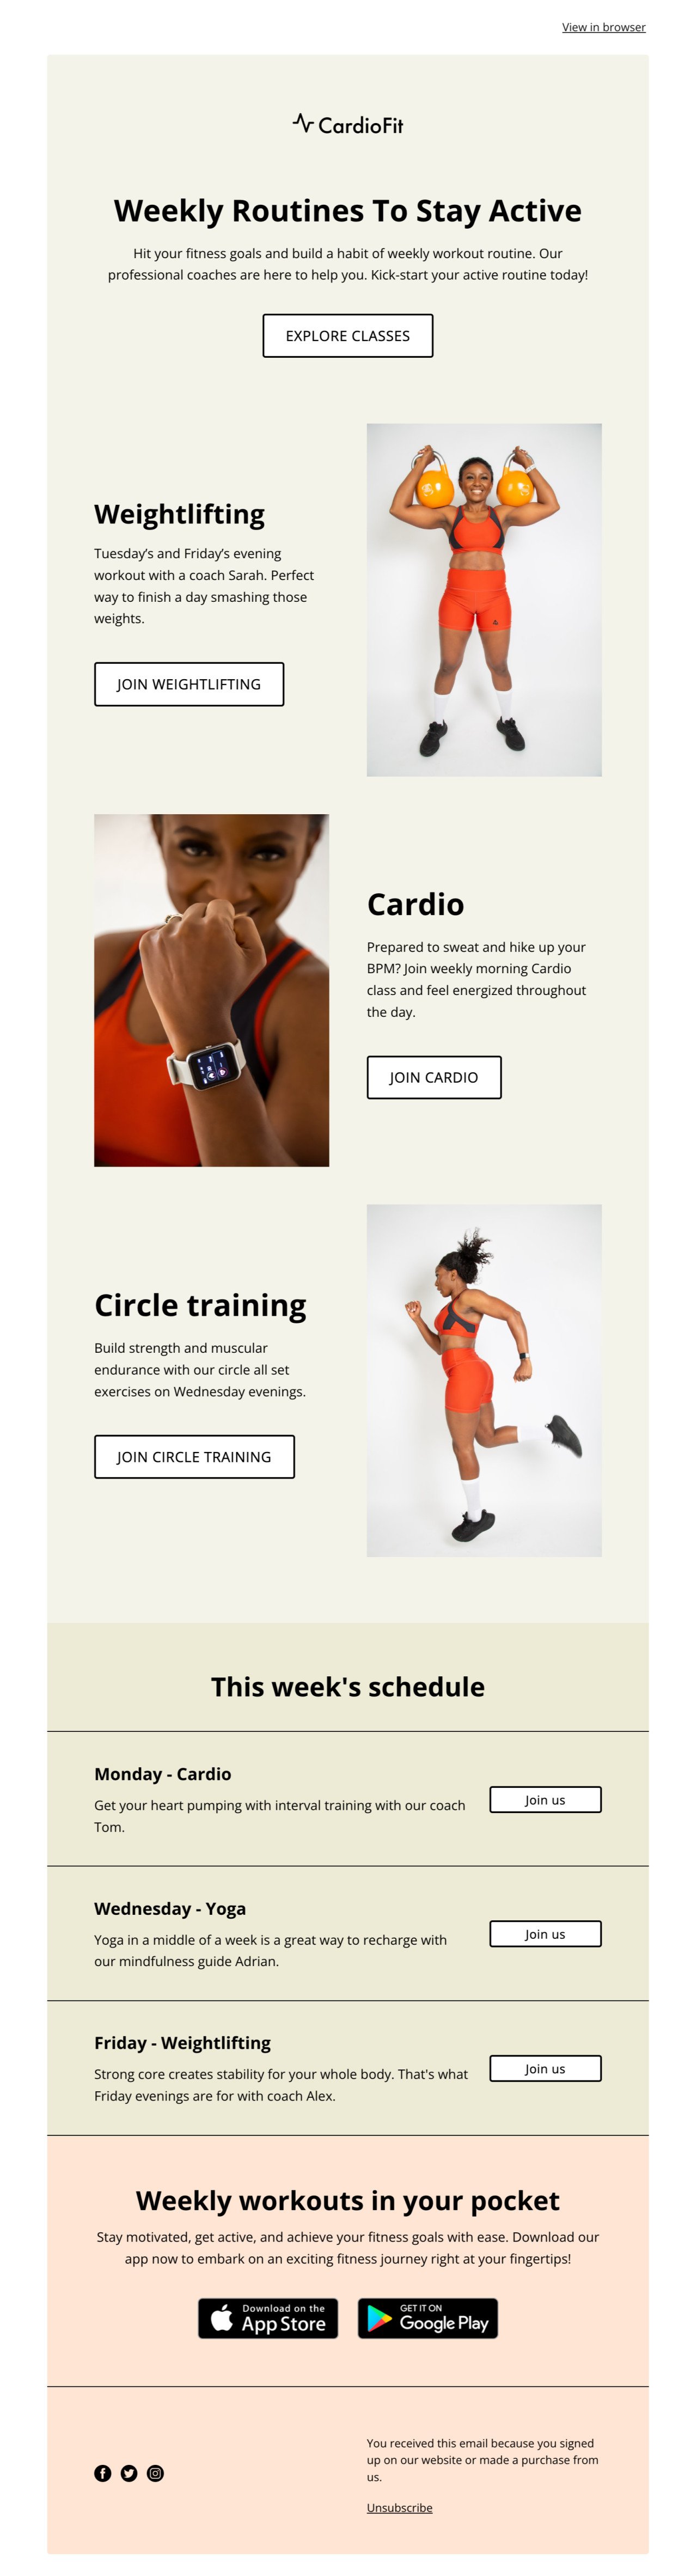 Fitness template - Made by MailerLite